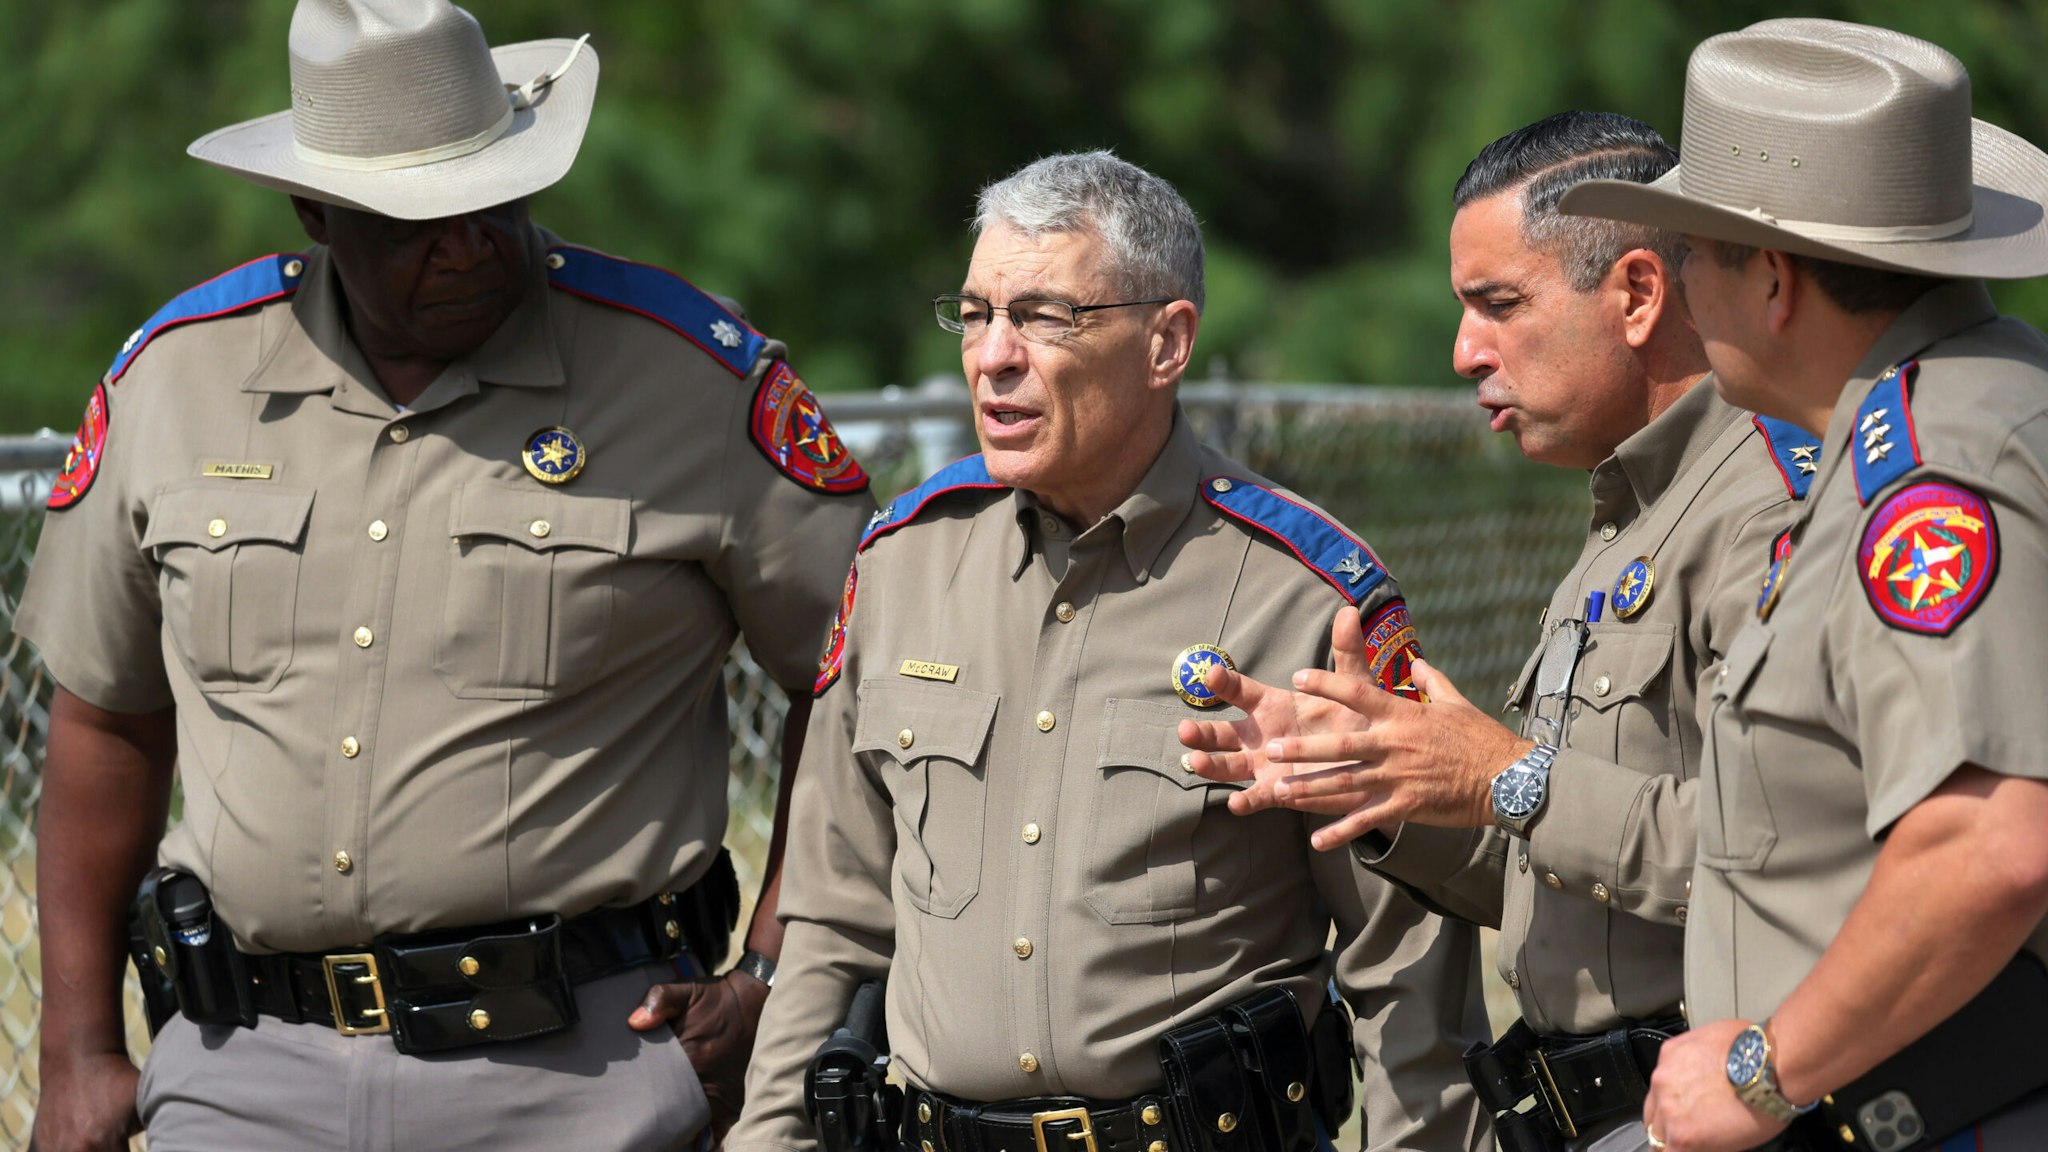 UVALDE, TEXAS - MAY 30: Steven C. McCraw, Director and Colonel of the Texas Department of Public Safety (2nd L), speaks with DPS State Troopers near Robb Elementary School on May 30, 2022 in Uvalde, Texas. Visitations for Amerie Jo Garza and Maite Rodriguez, two of the 19 children killed in the May 24th Robb Elementary School mass shooting are being held today. Wakes and funerals for the 21 victims will be scheduled throughout the week.